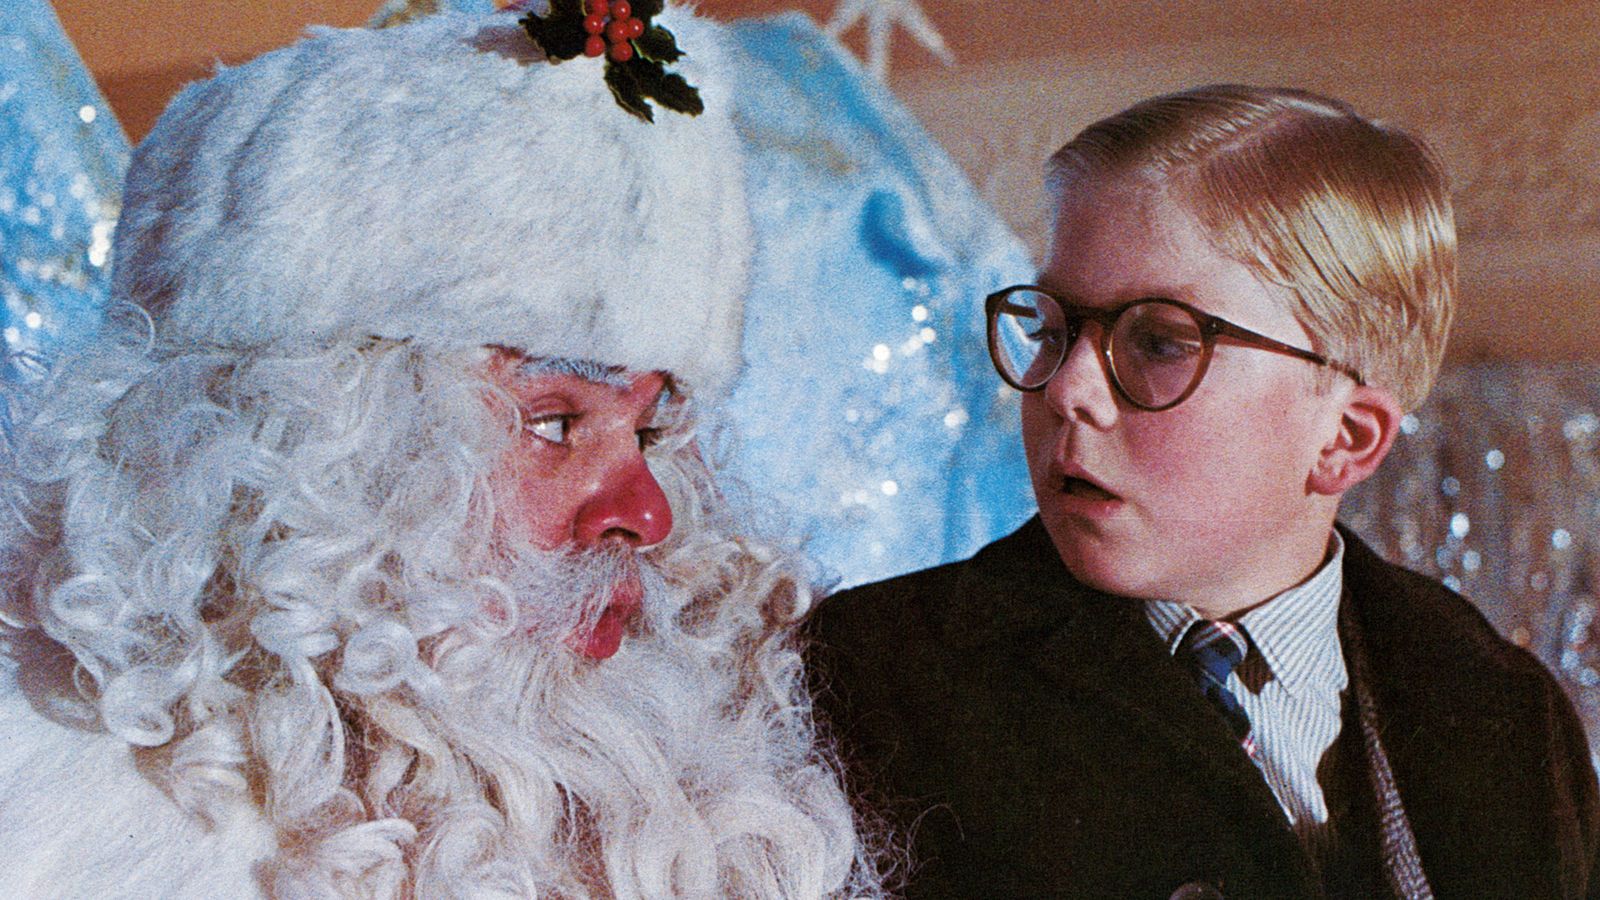 Peter Billingsley to take part in "A Christmas Story" reunion Axios